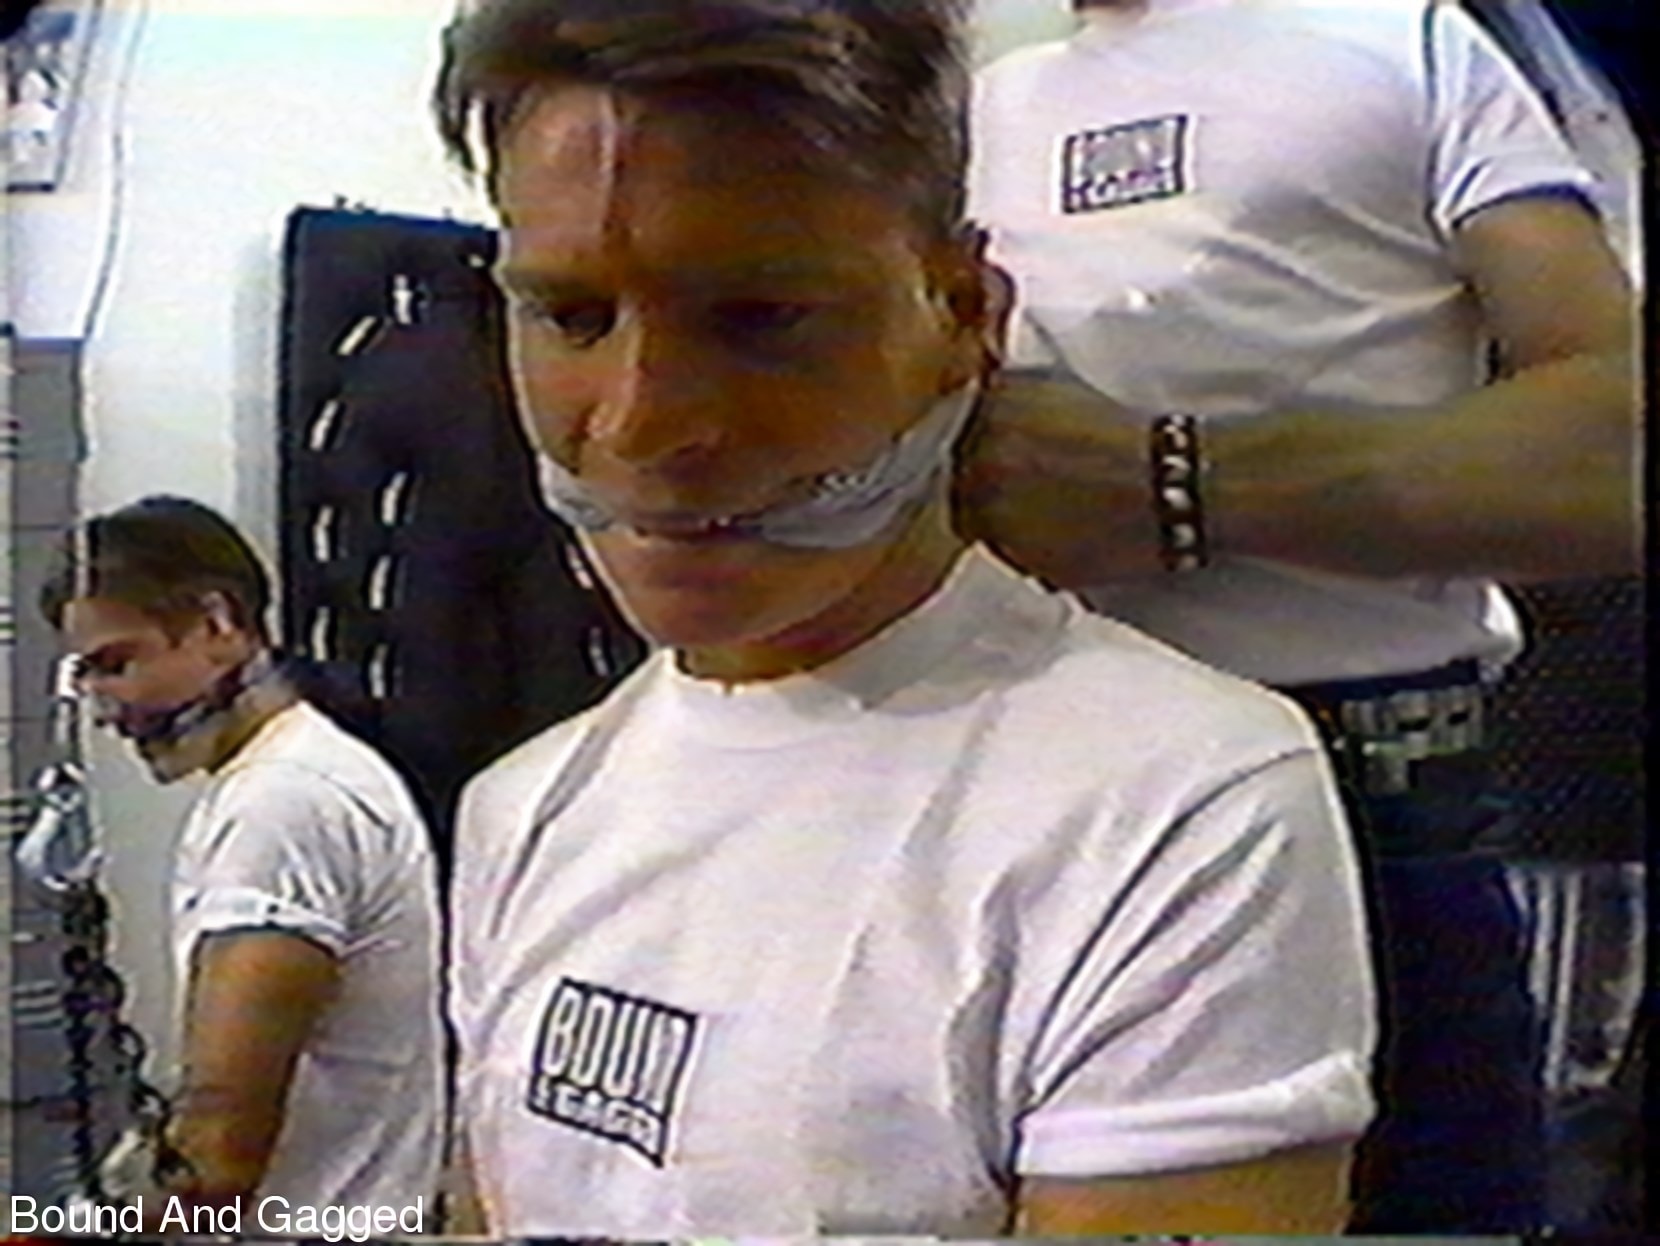 Kink Partners Gay 'Bound and Gagged: The Video - Three Guys Horsing Around' starring Bob Phillips (Photo 1)